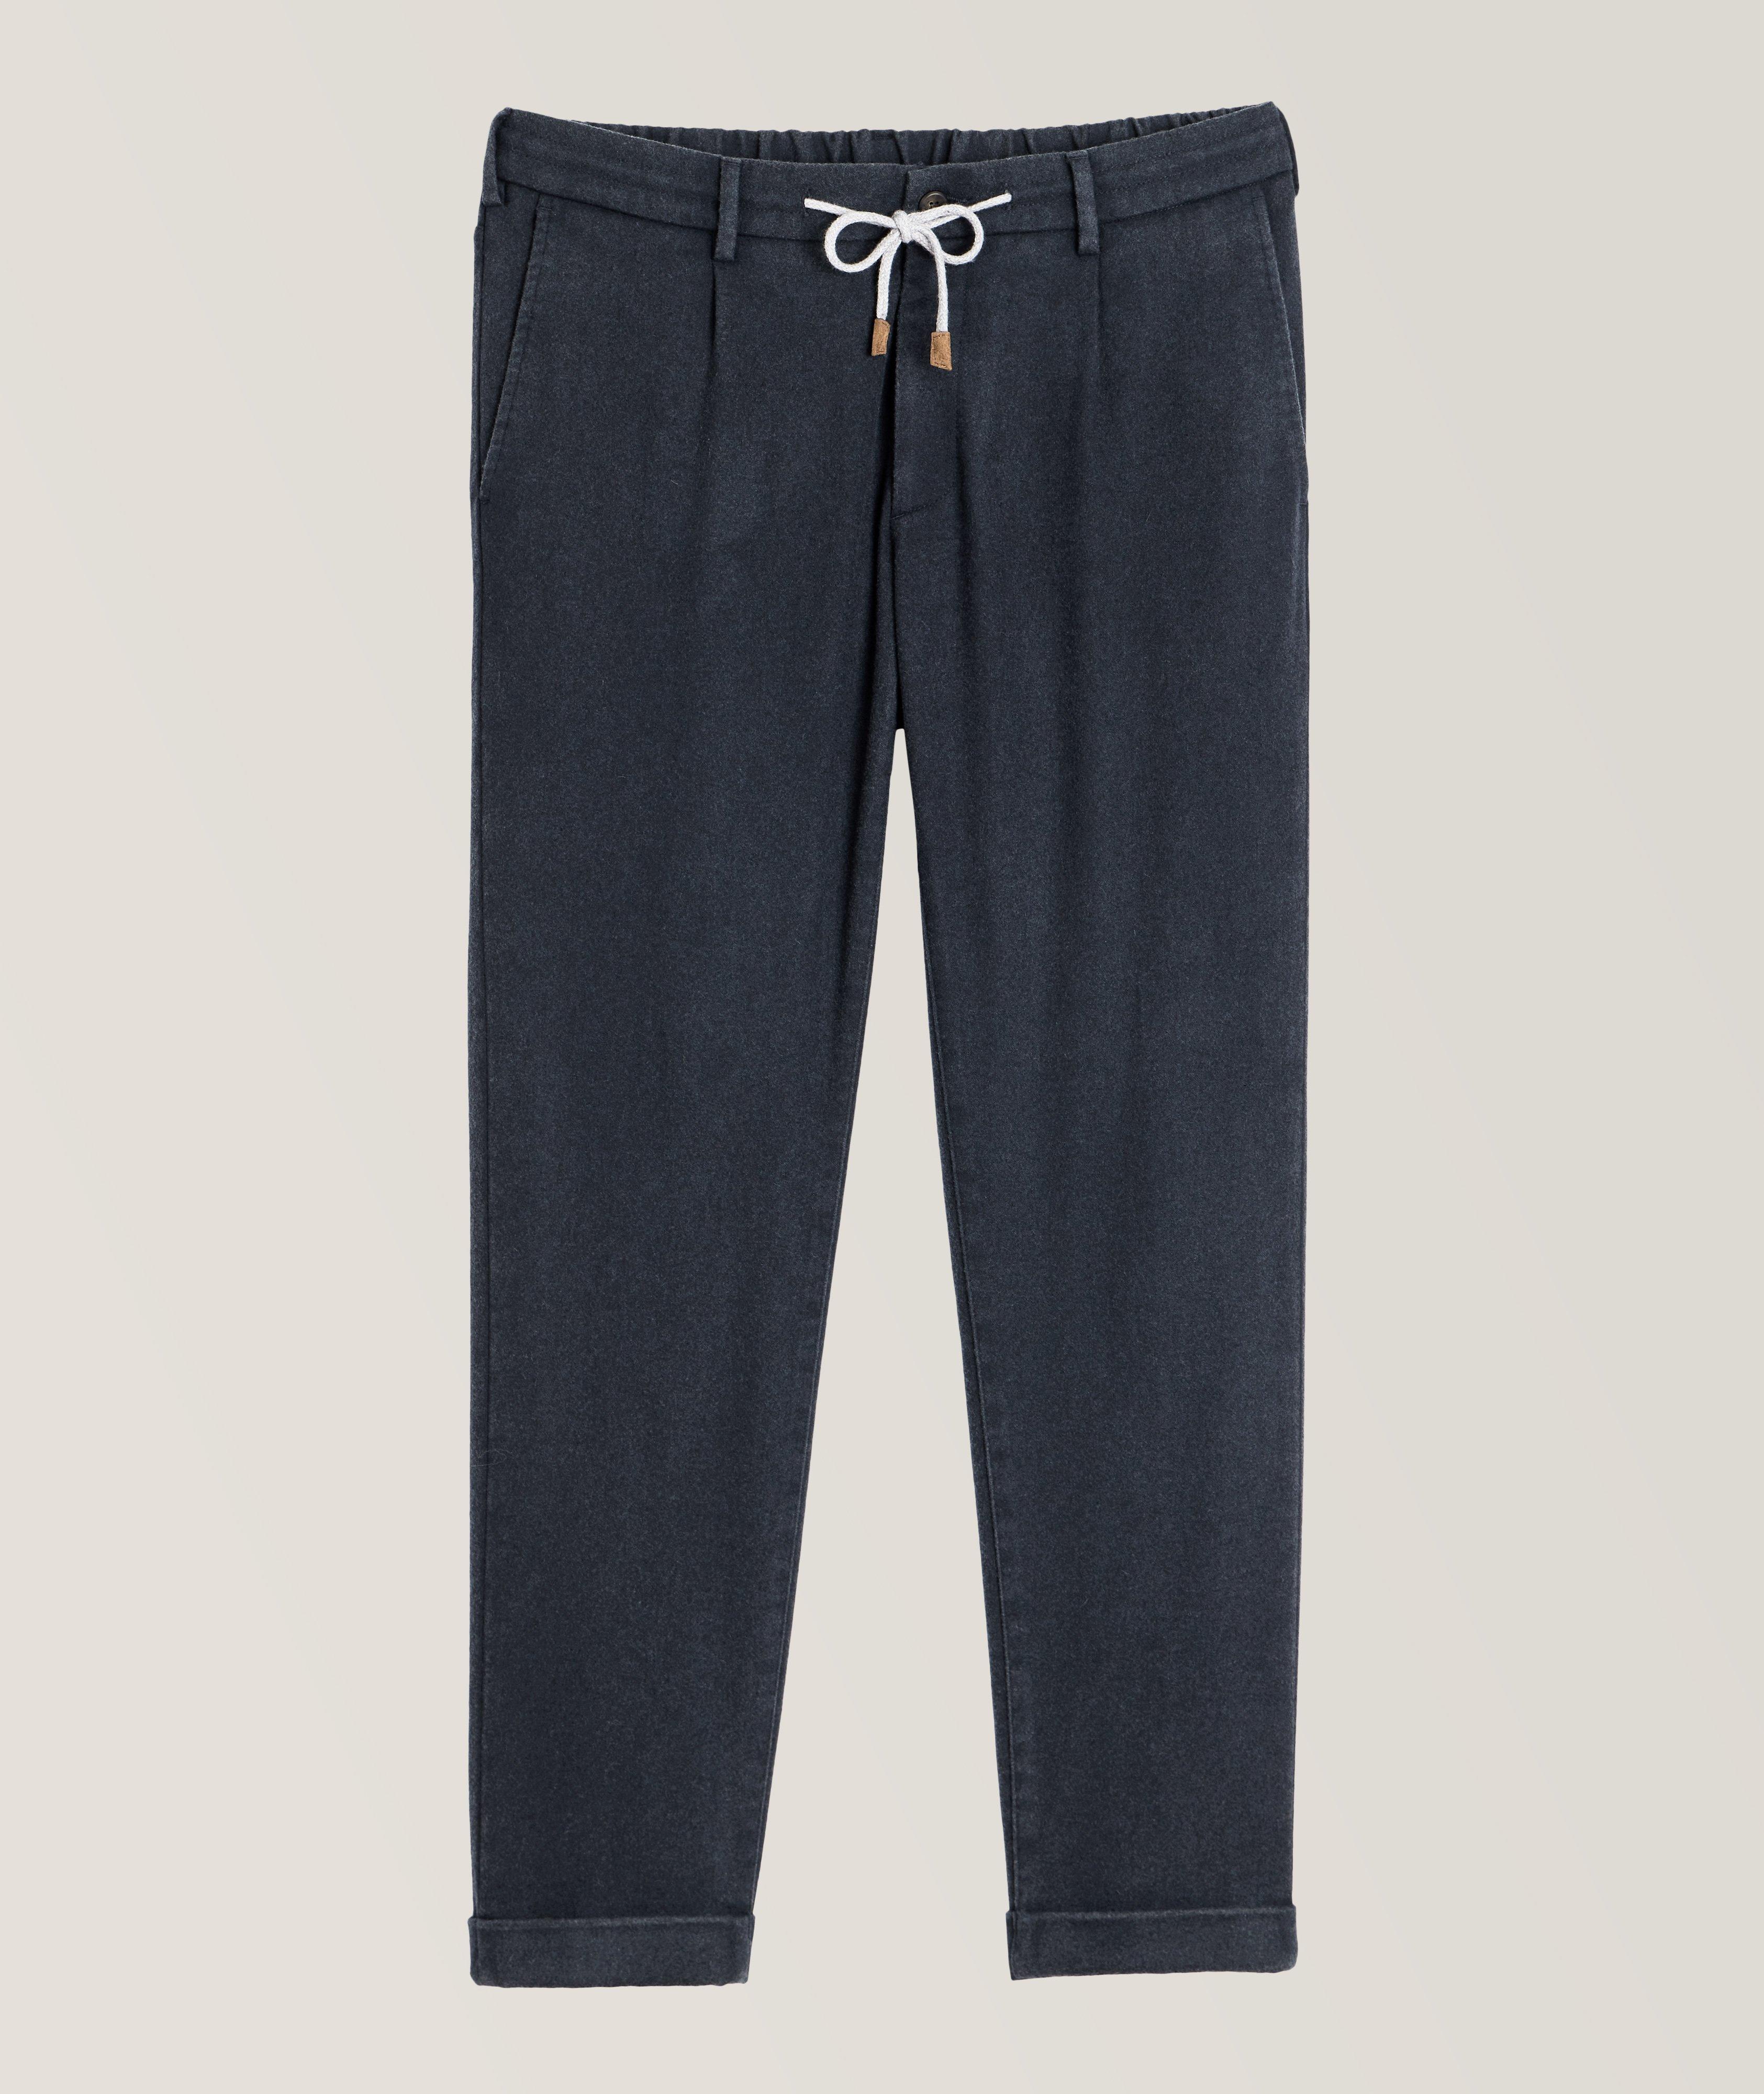 Wool & Cashmere-Stretch Blend Joggers image 0